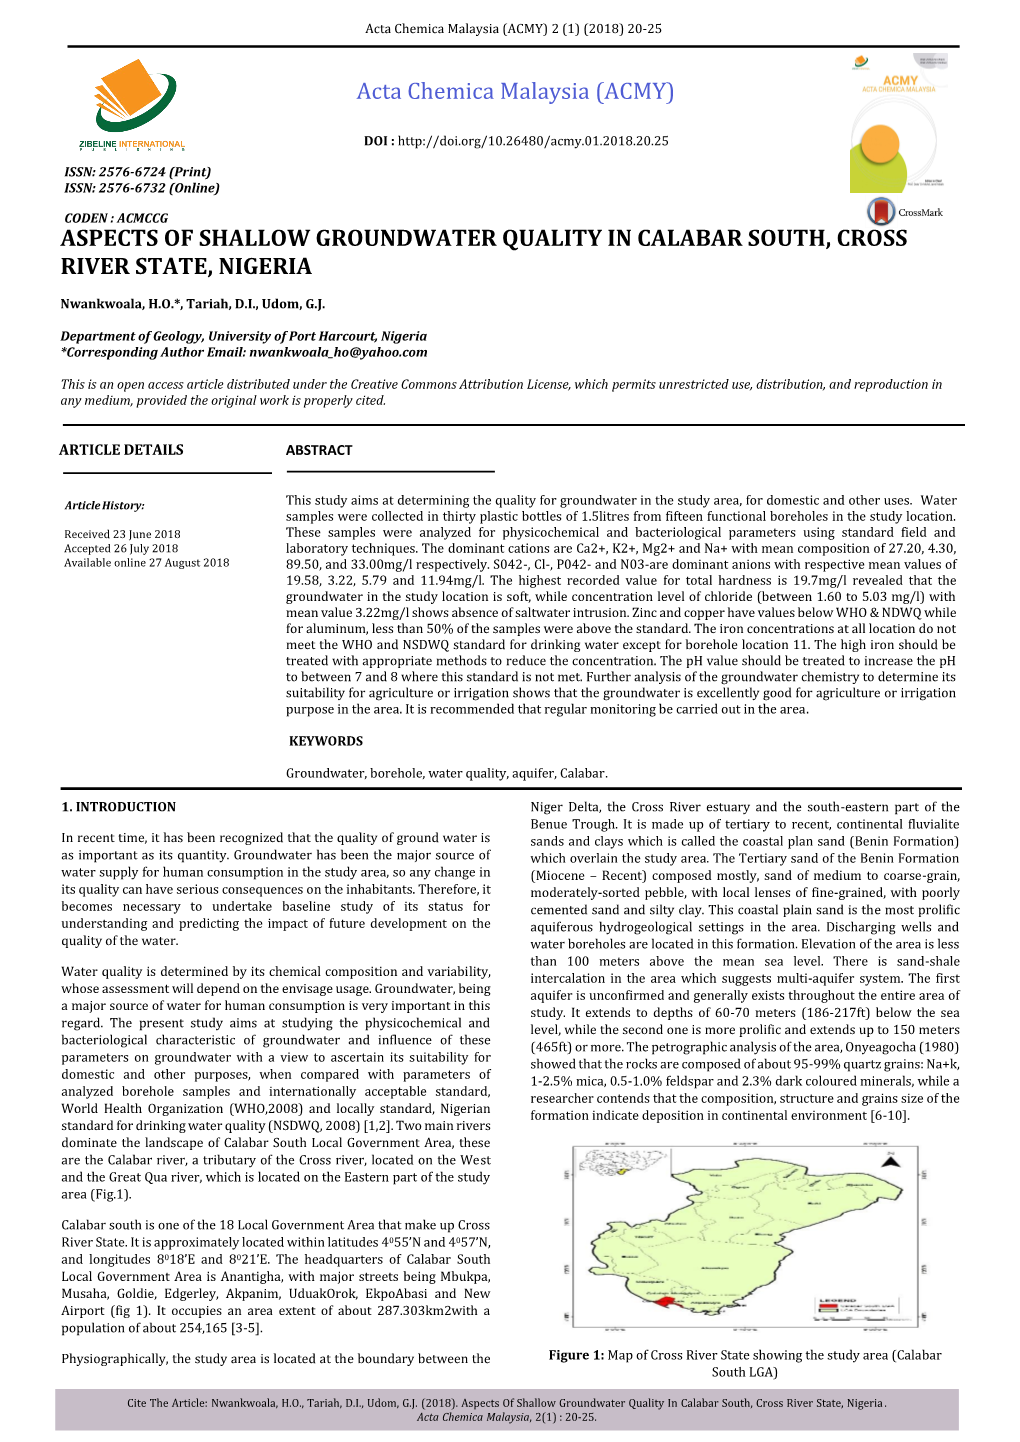 Aspects of Shallow Groundwater Quality in Calabar South, Cross River State, Nigeria